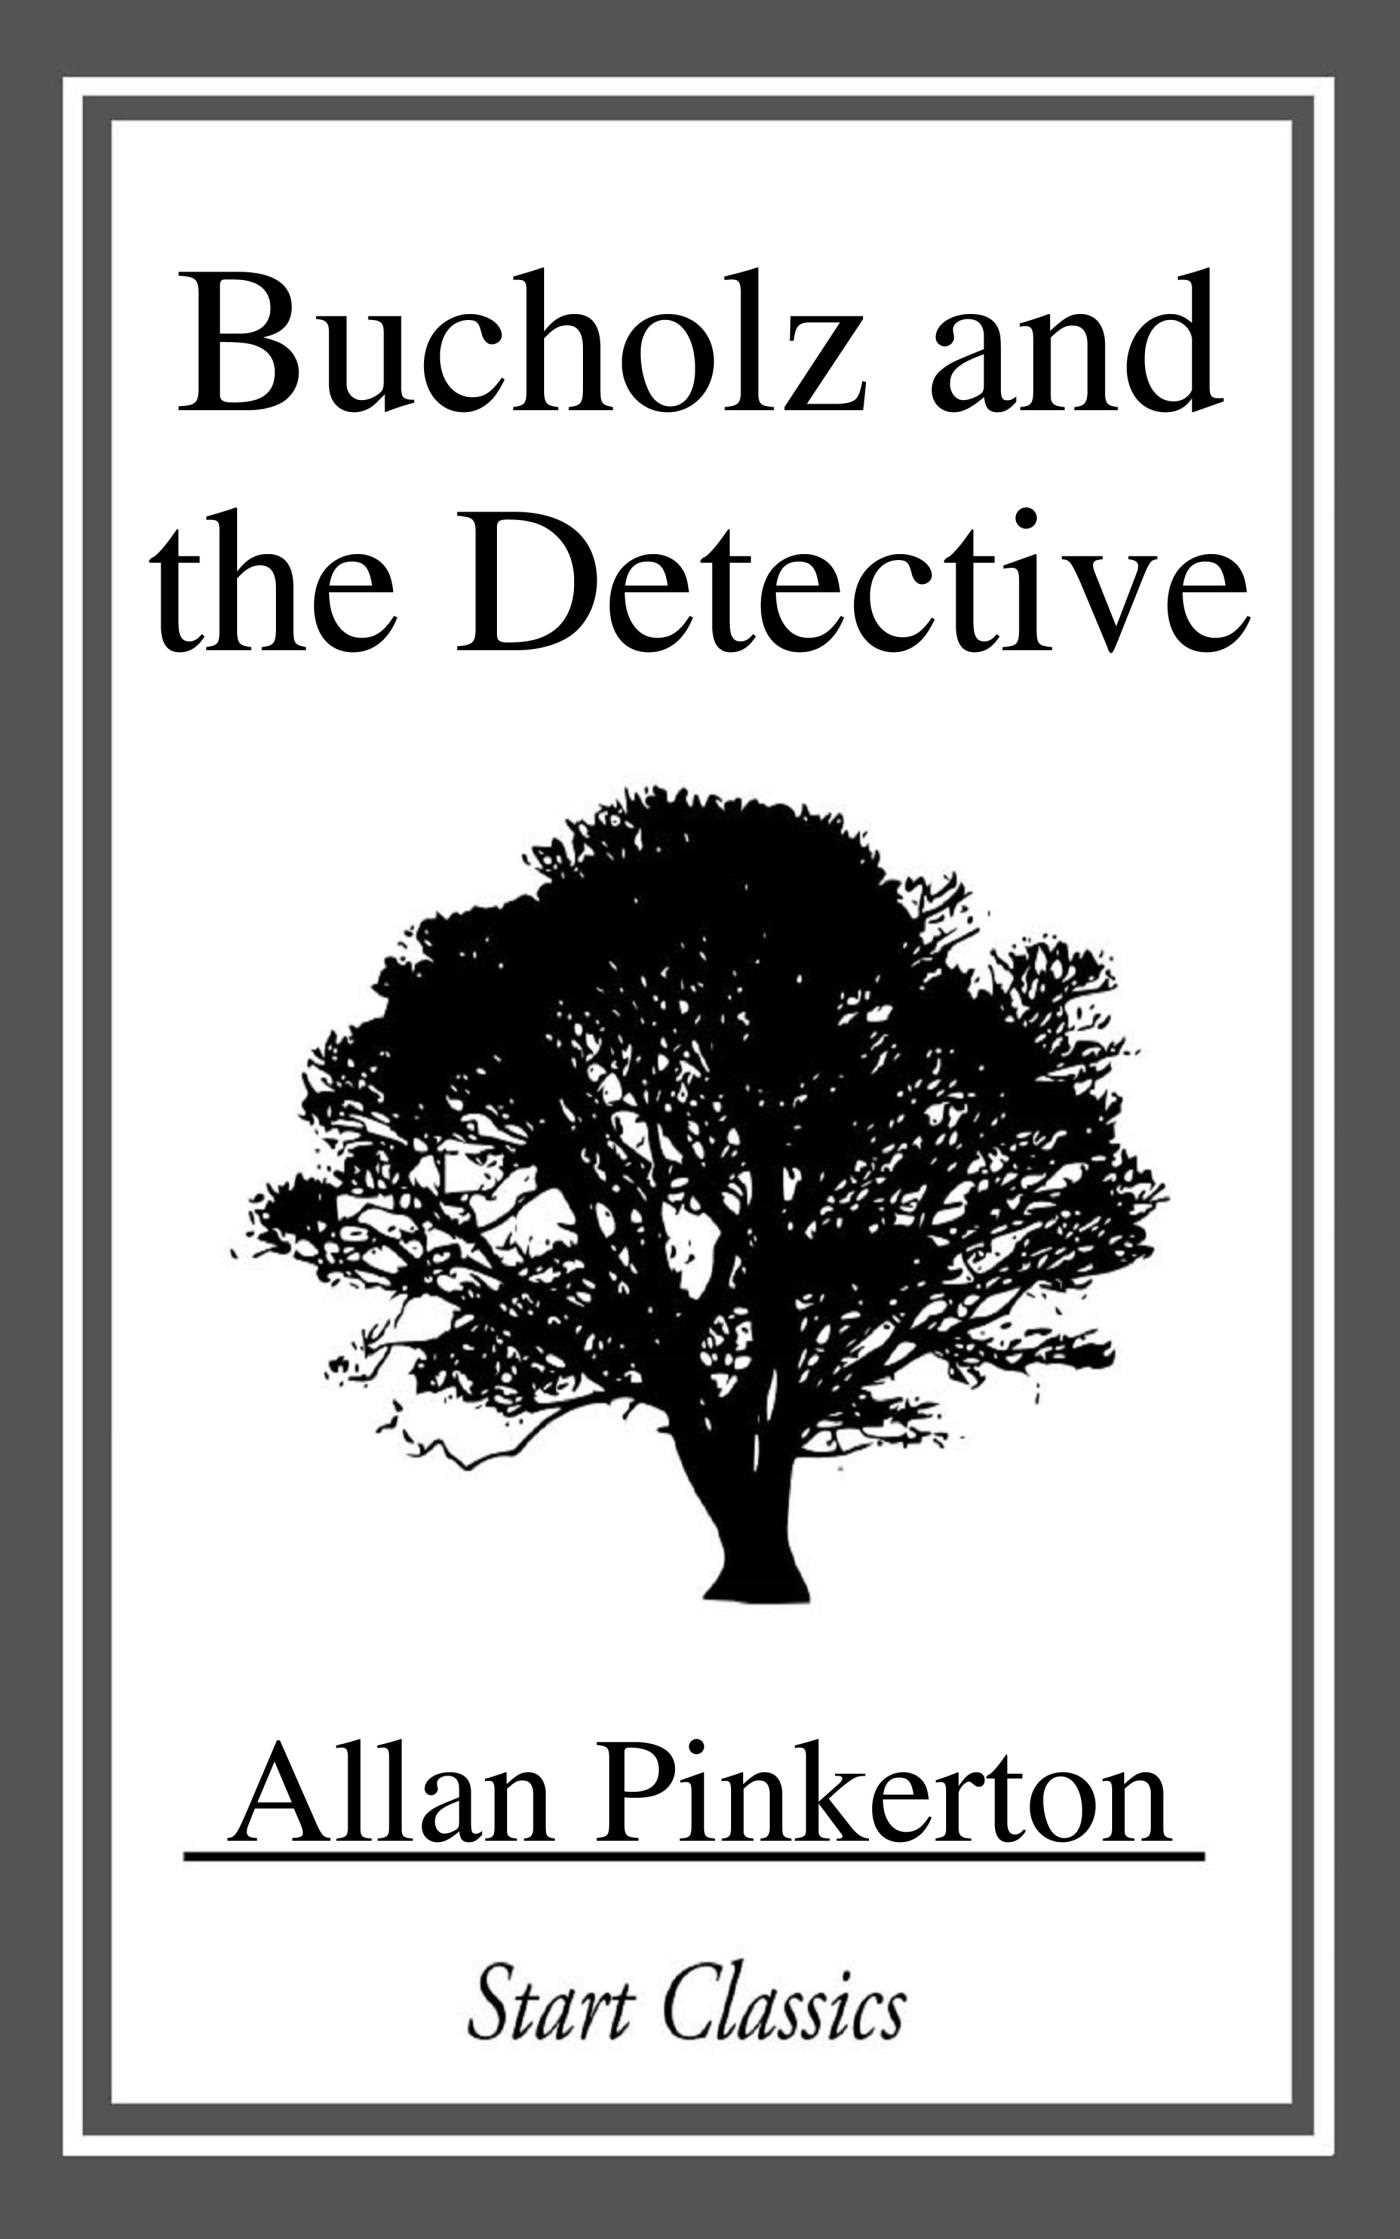 Bucholz and the Detective - Allan Pinkerton